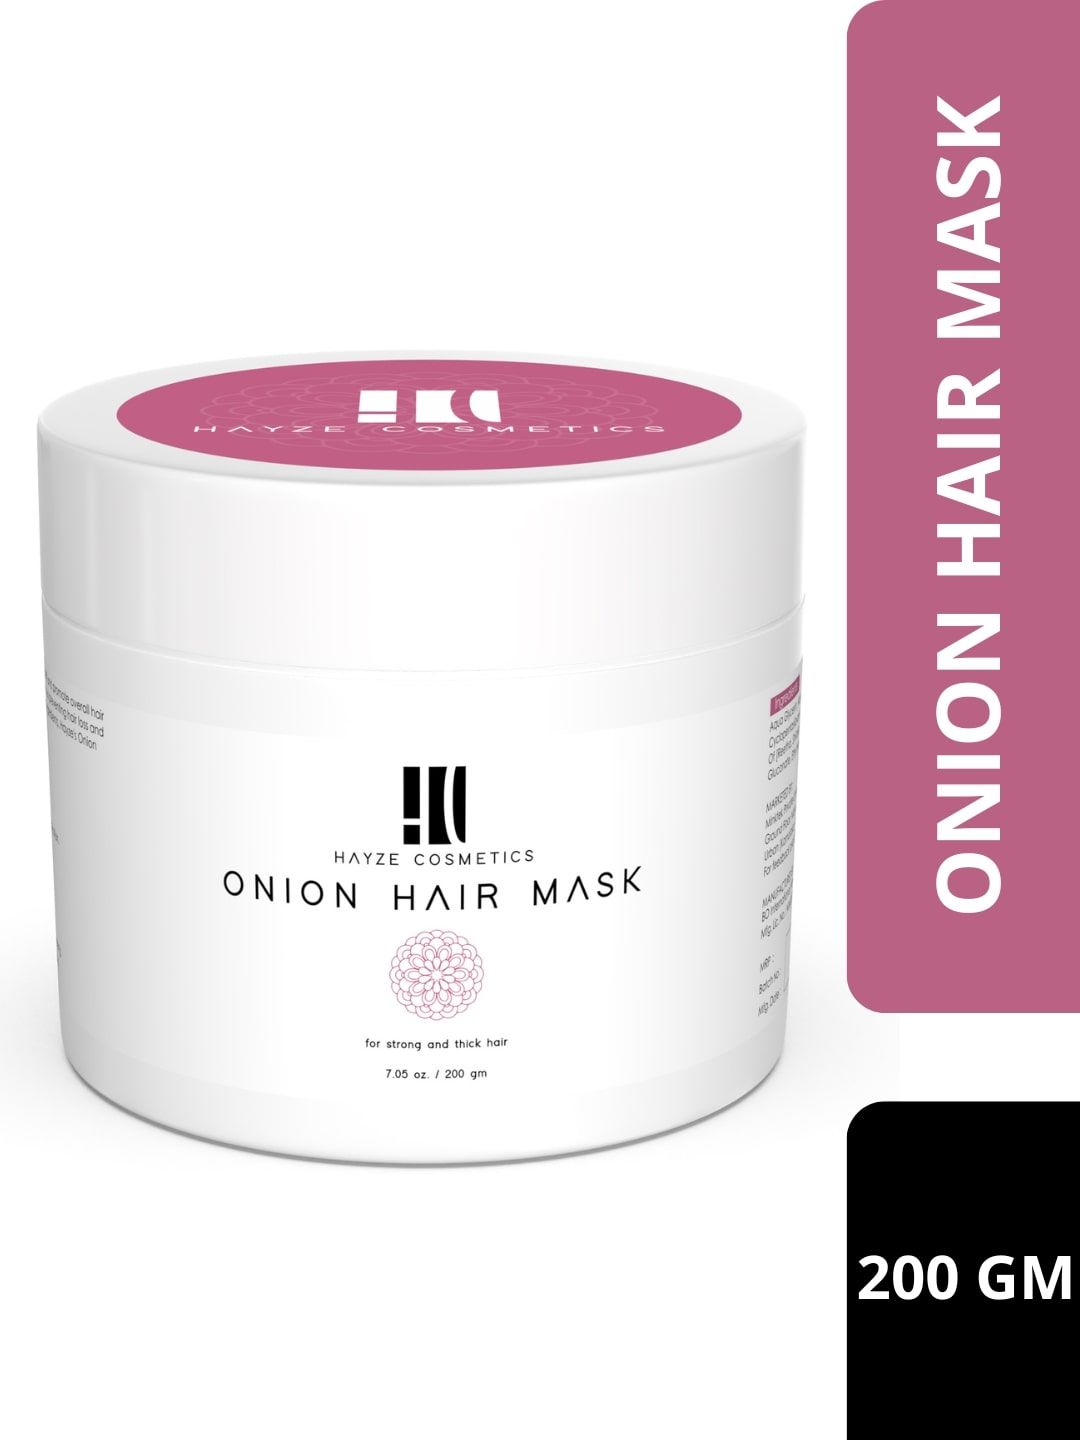 HAYZE COSMETICS Onion Hair Mask for Strong & Thick Hair - 200g Price in India